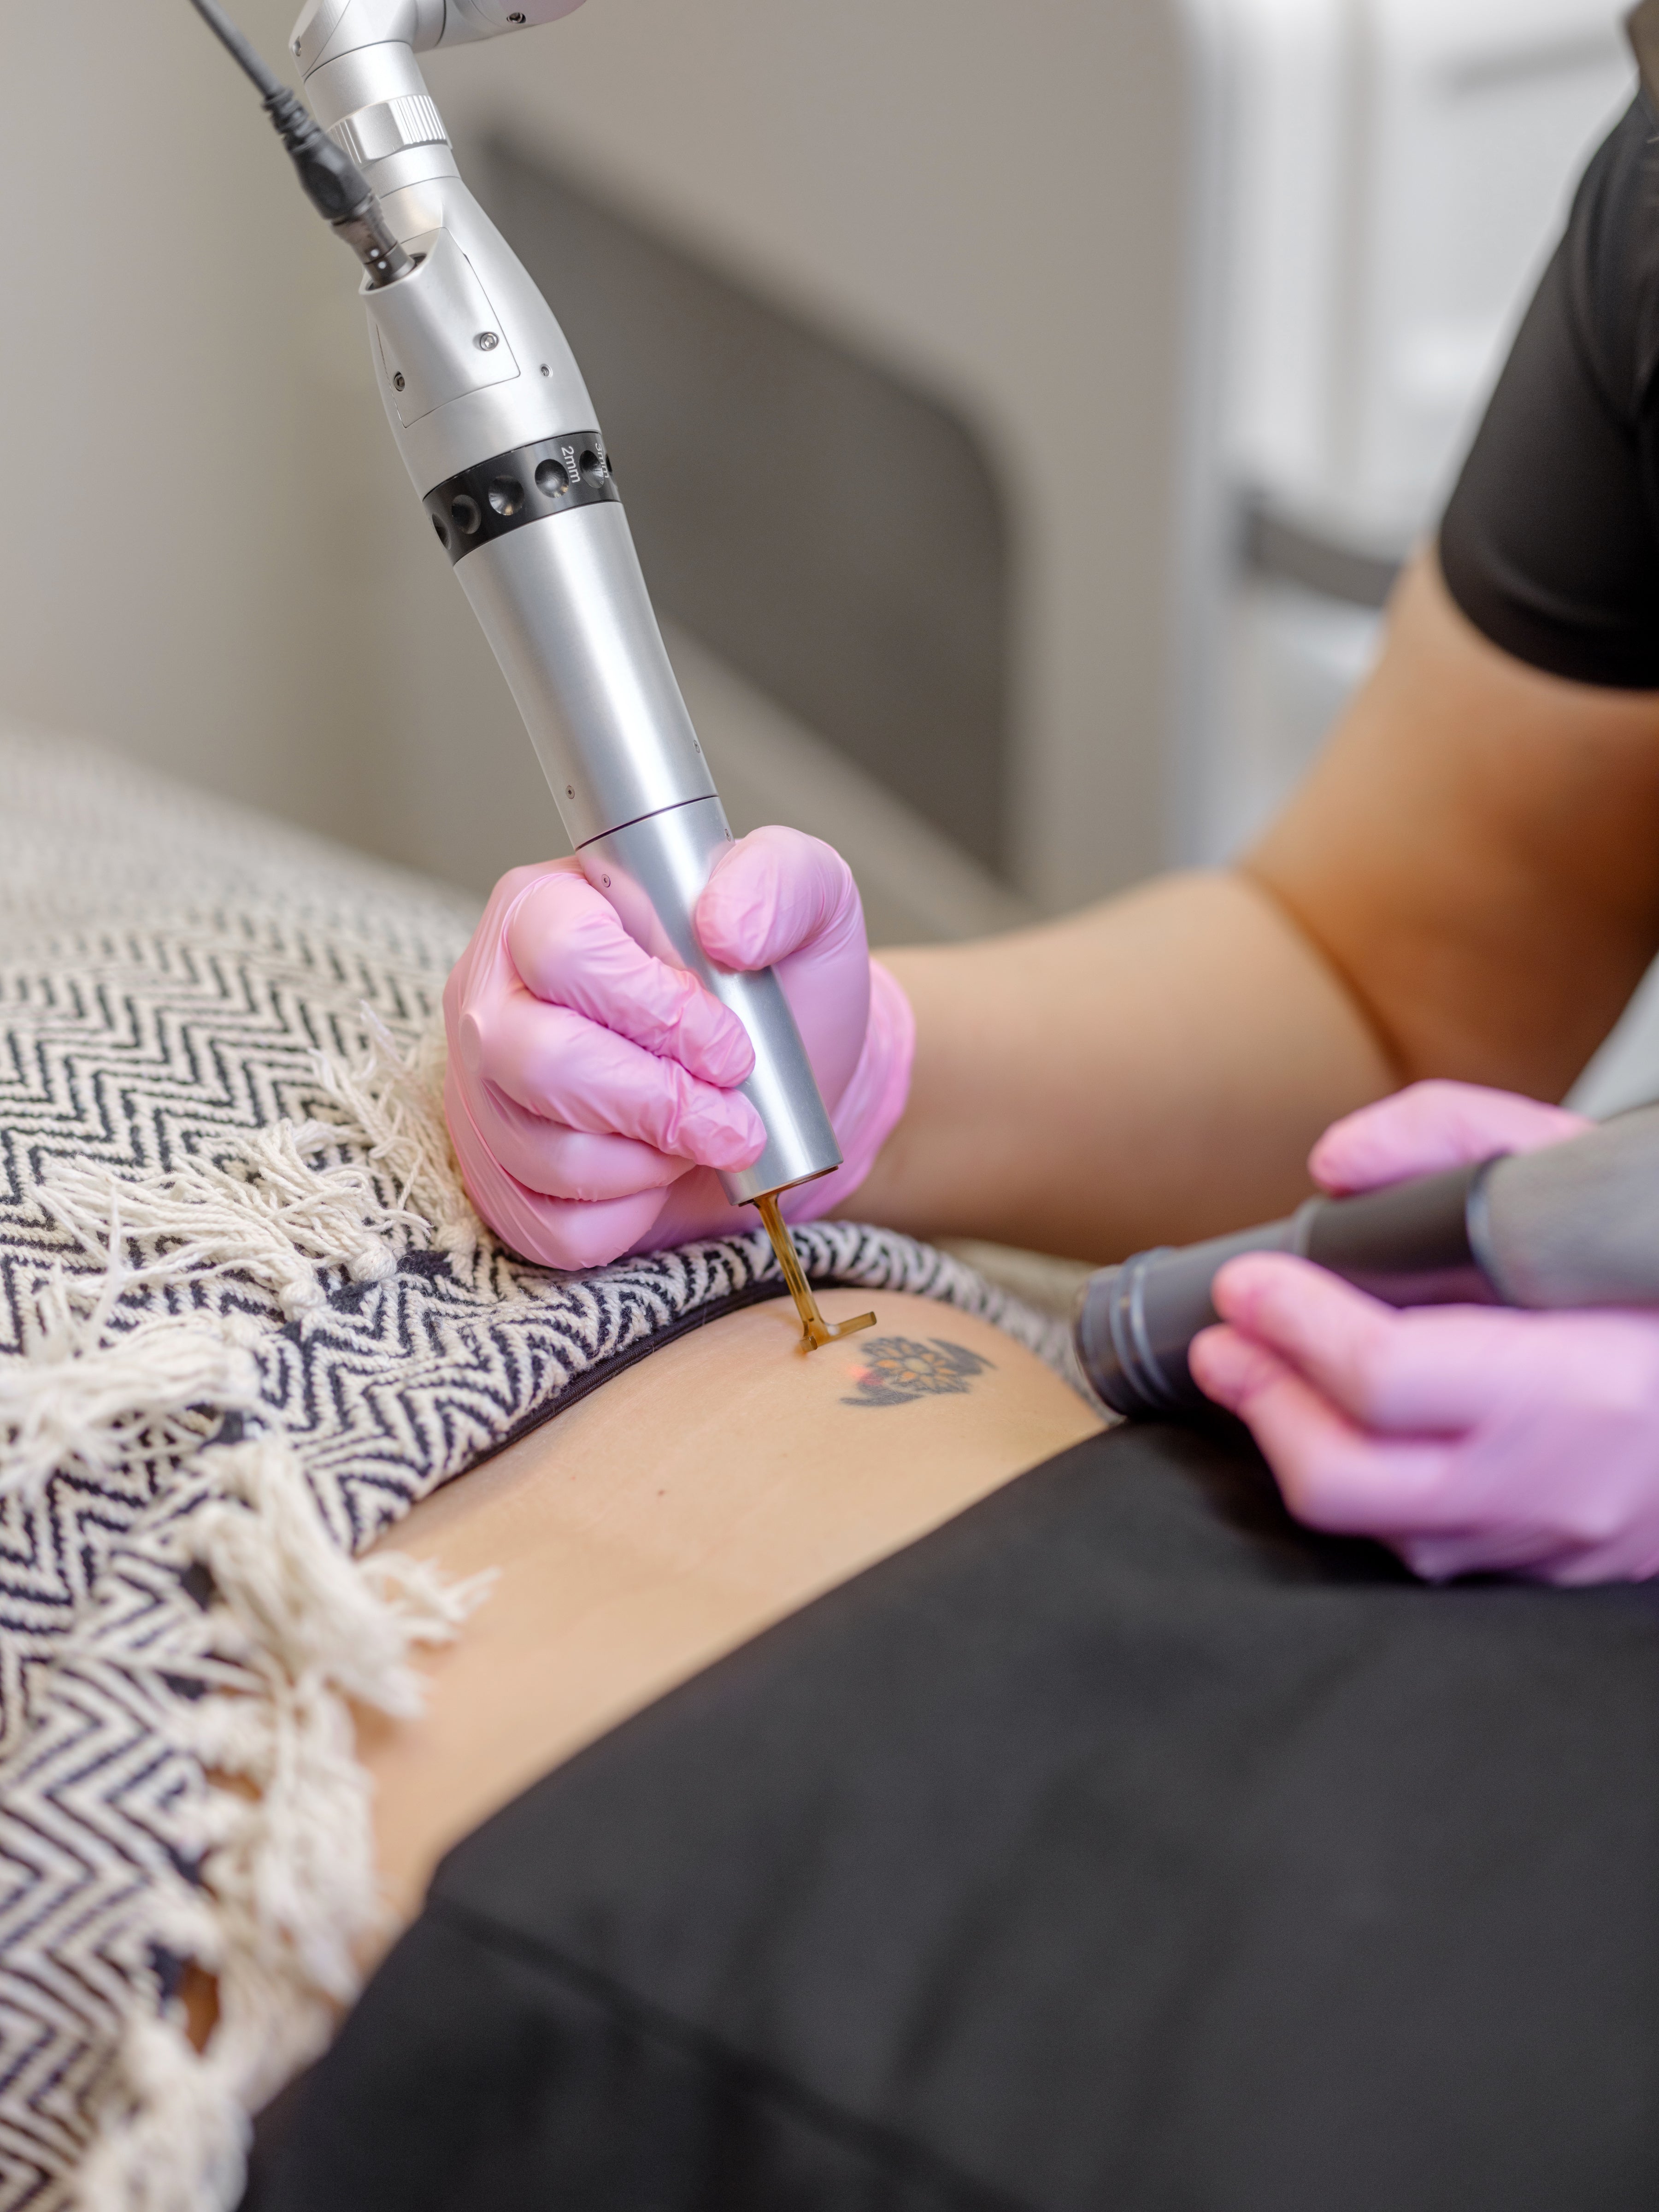 Tattoo Removal 101 - Learn Tattoo Removal